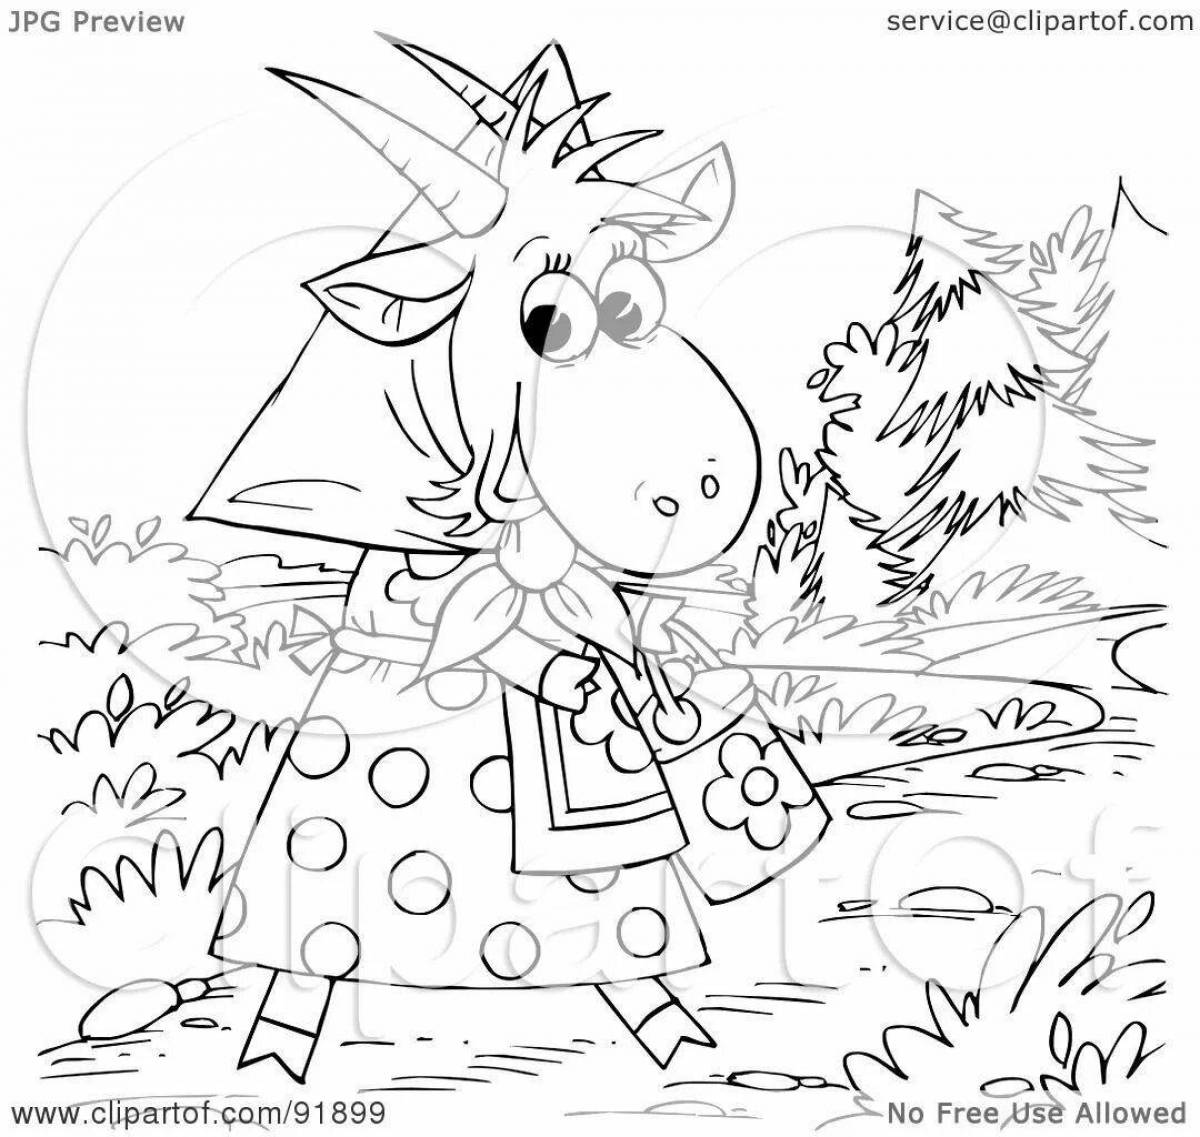 Coloring page charming goat dereza